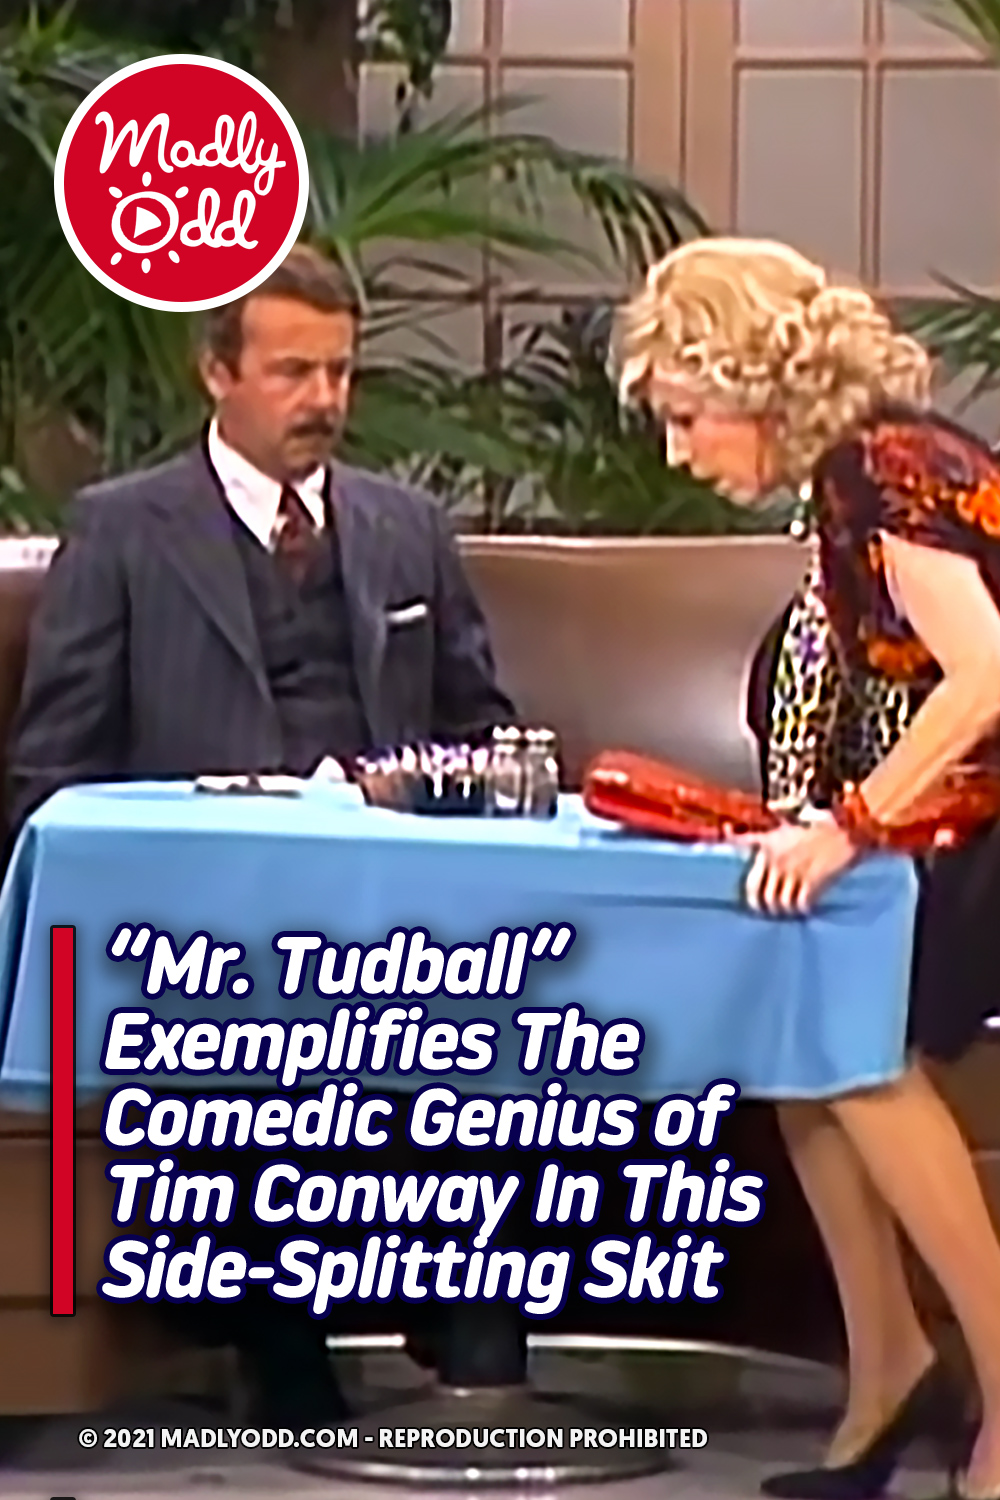 “Mr. Tudball” Exemplifies The Comedic Genius of Tim Conway In This Side-Splitting Skit